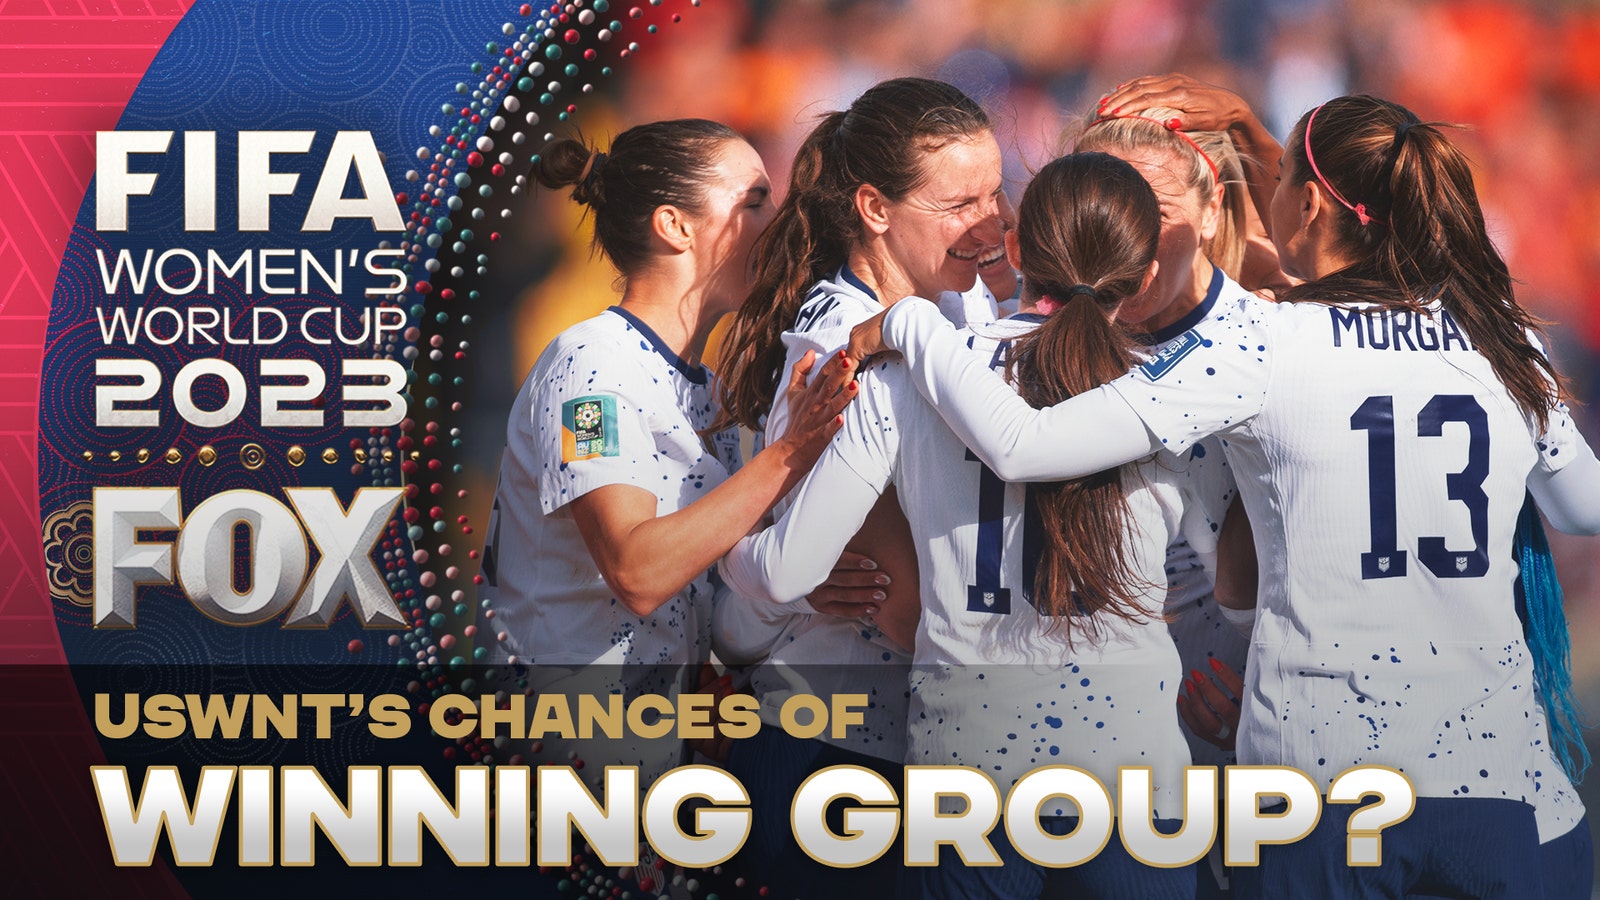 "World Cup NOW" crew discusses USWNT's chances of winning Group E